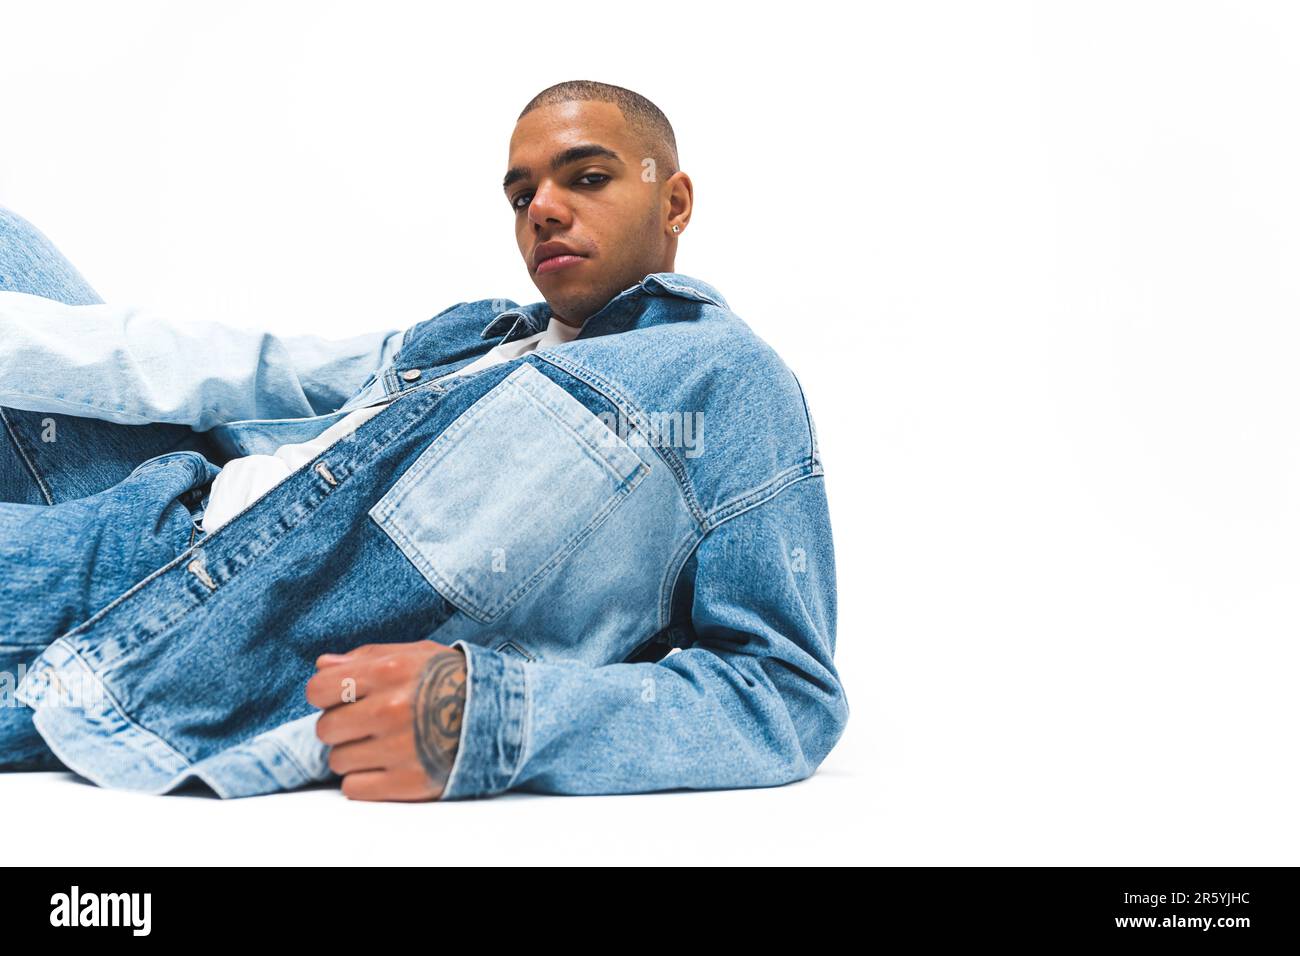 African American man with serious facial expression wearing denim jacket and jeans posing on the floor against a white background. High quality 4k footage Stock Photo